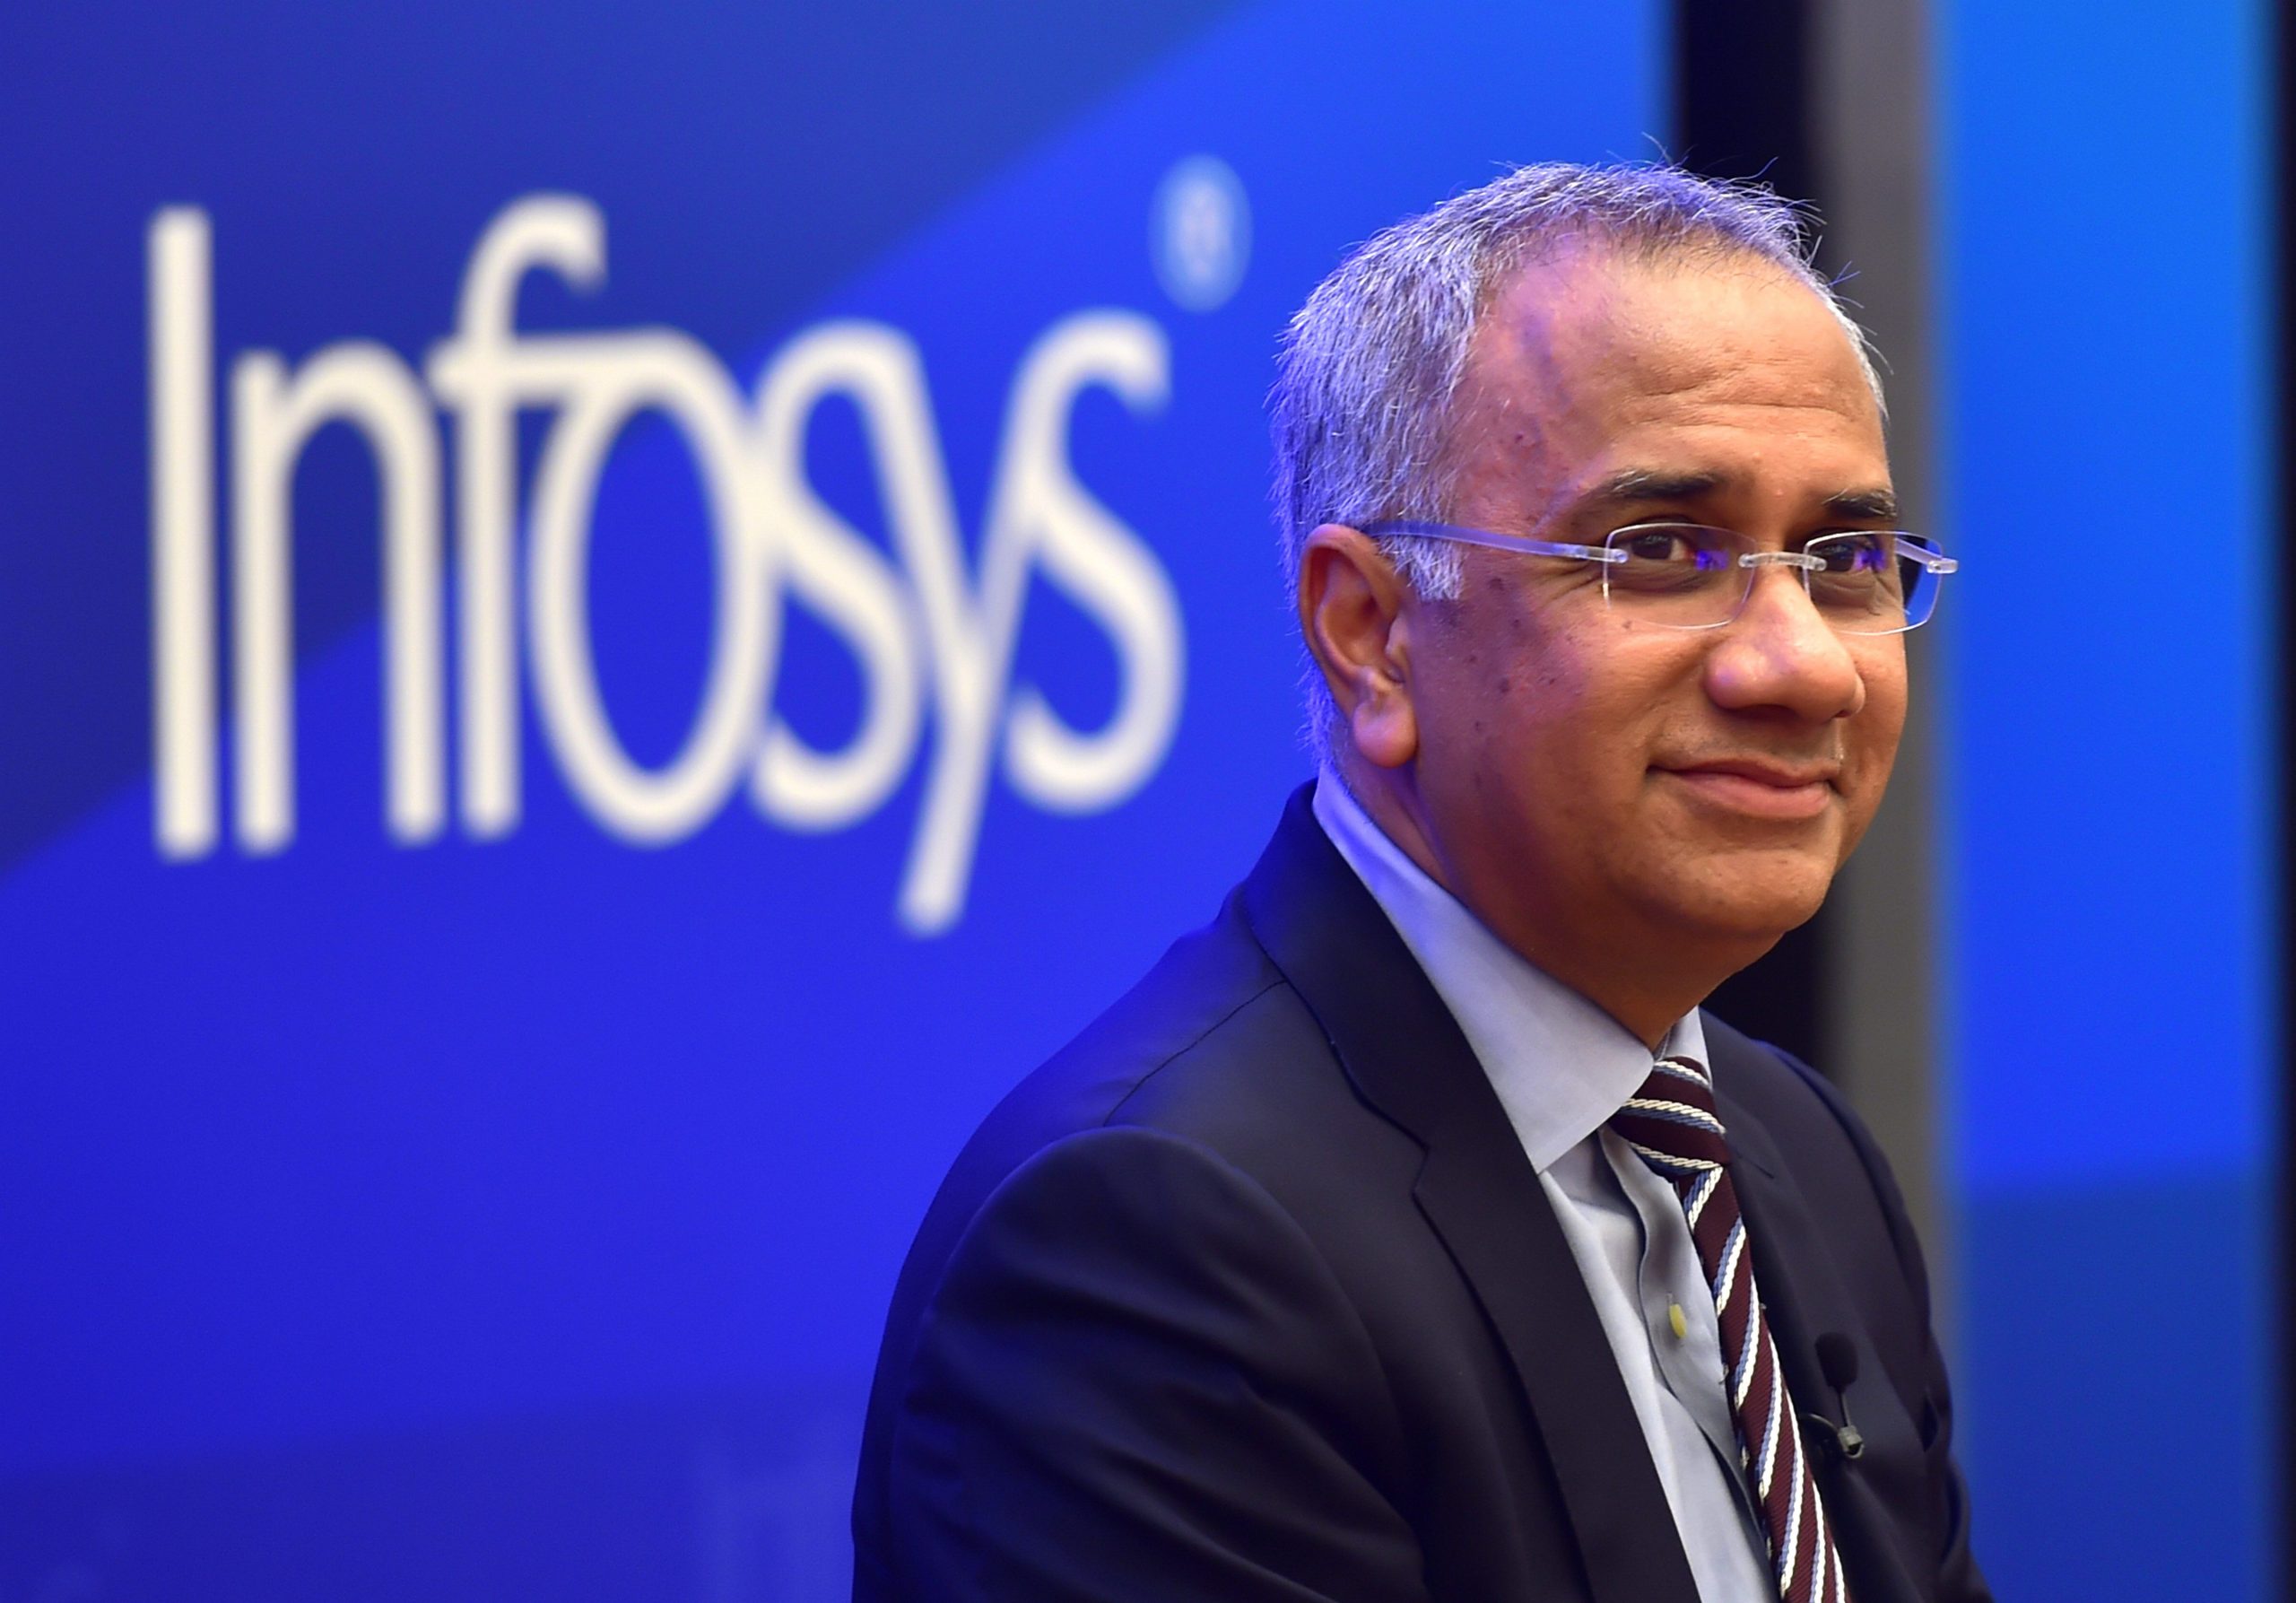 Infosys Q2 Results: Net profit rises 11% YoY, shares buyback announced